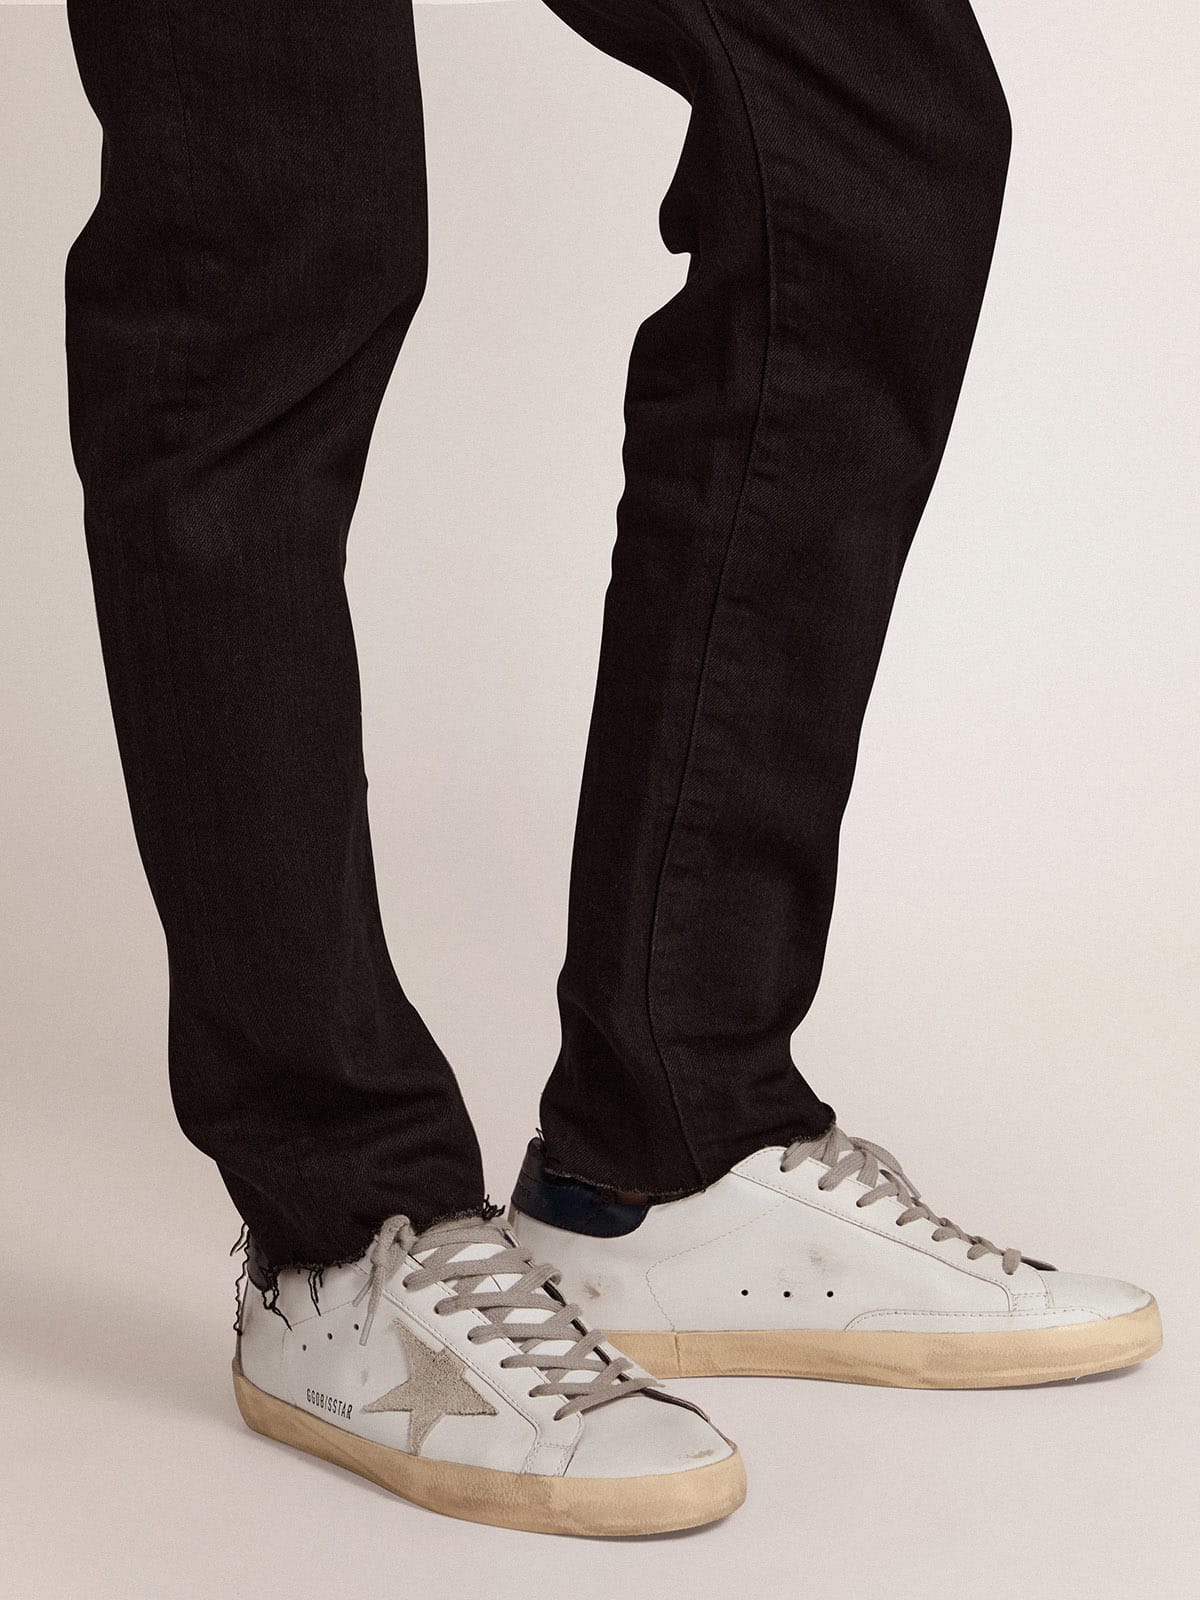 Men's Super-Star with suede star and blue heel tab | Golden Goose